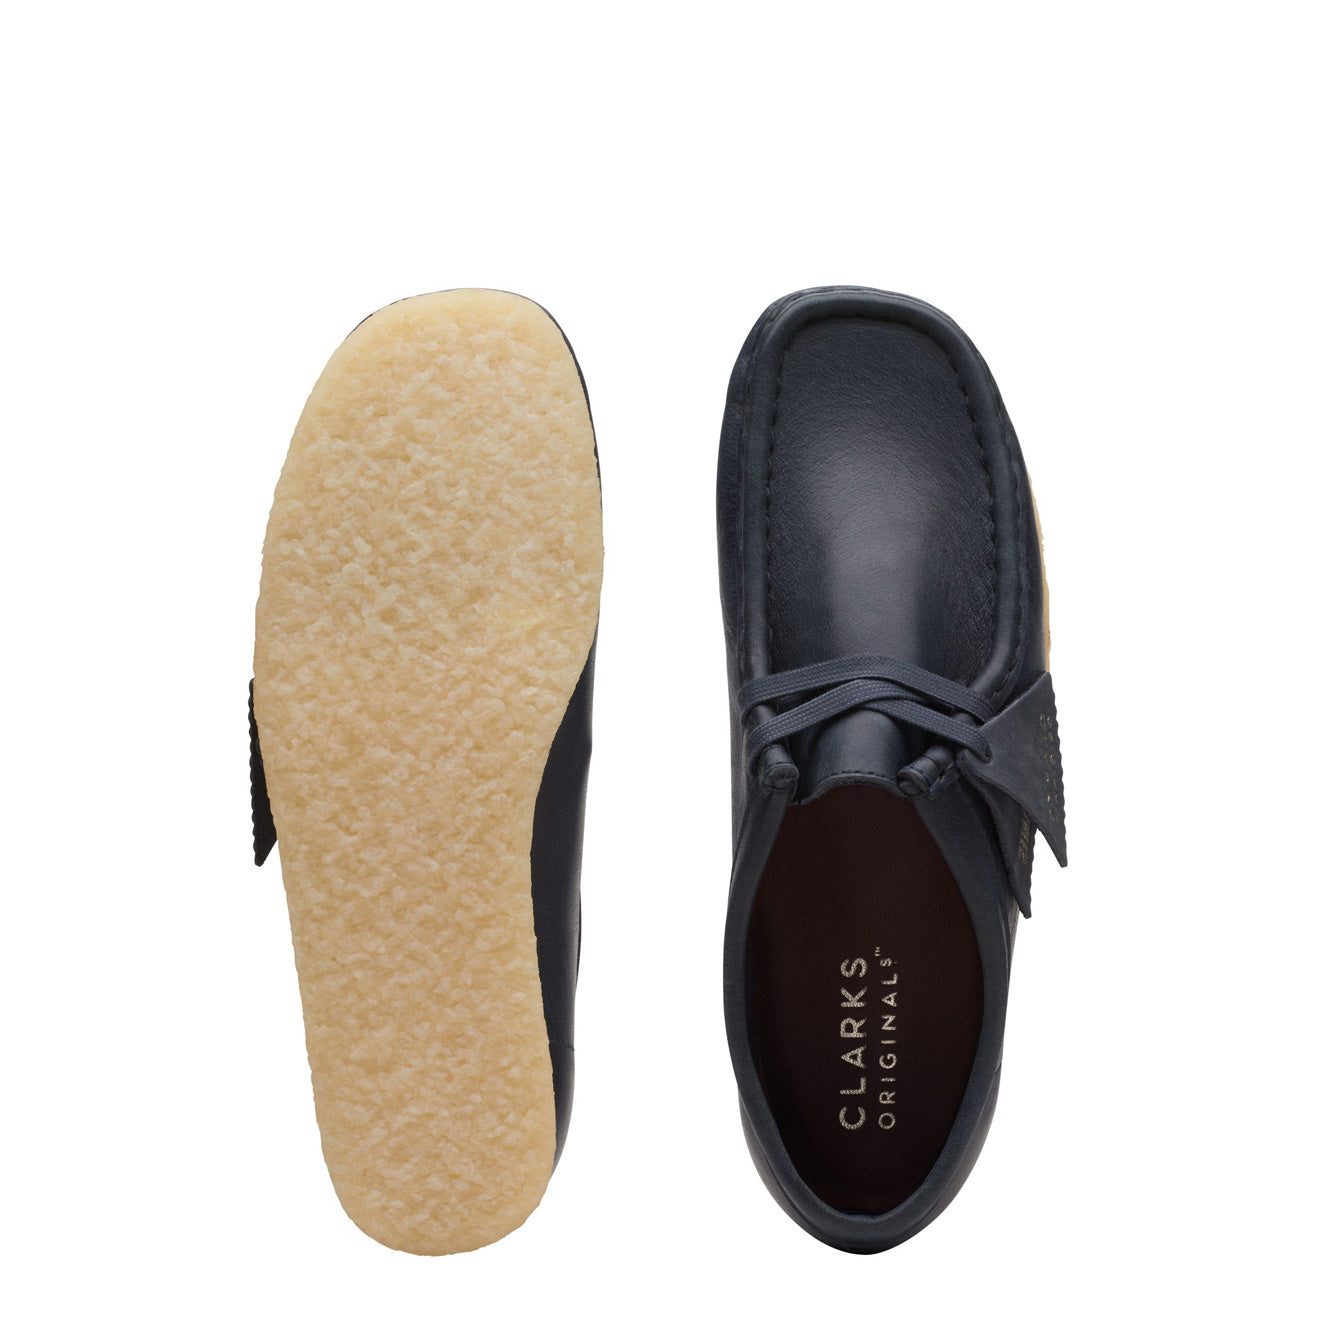 Clarks Originals Womens Wallabee Navy Leather | The Sporting Lodge